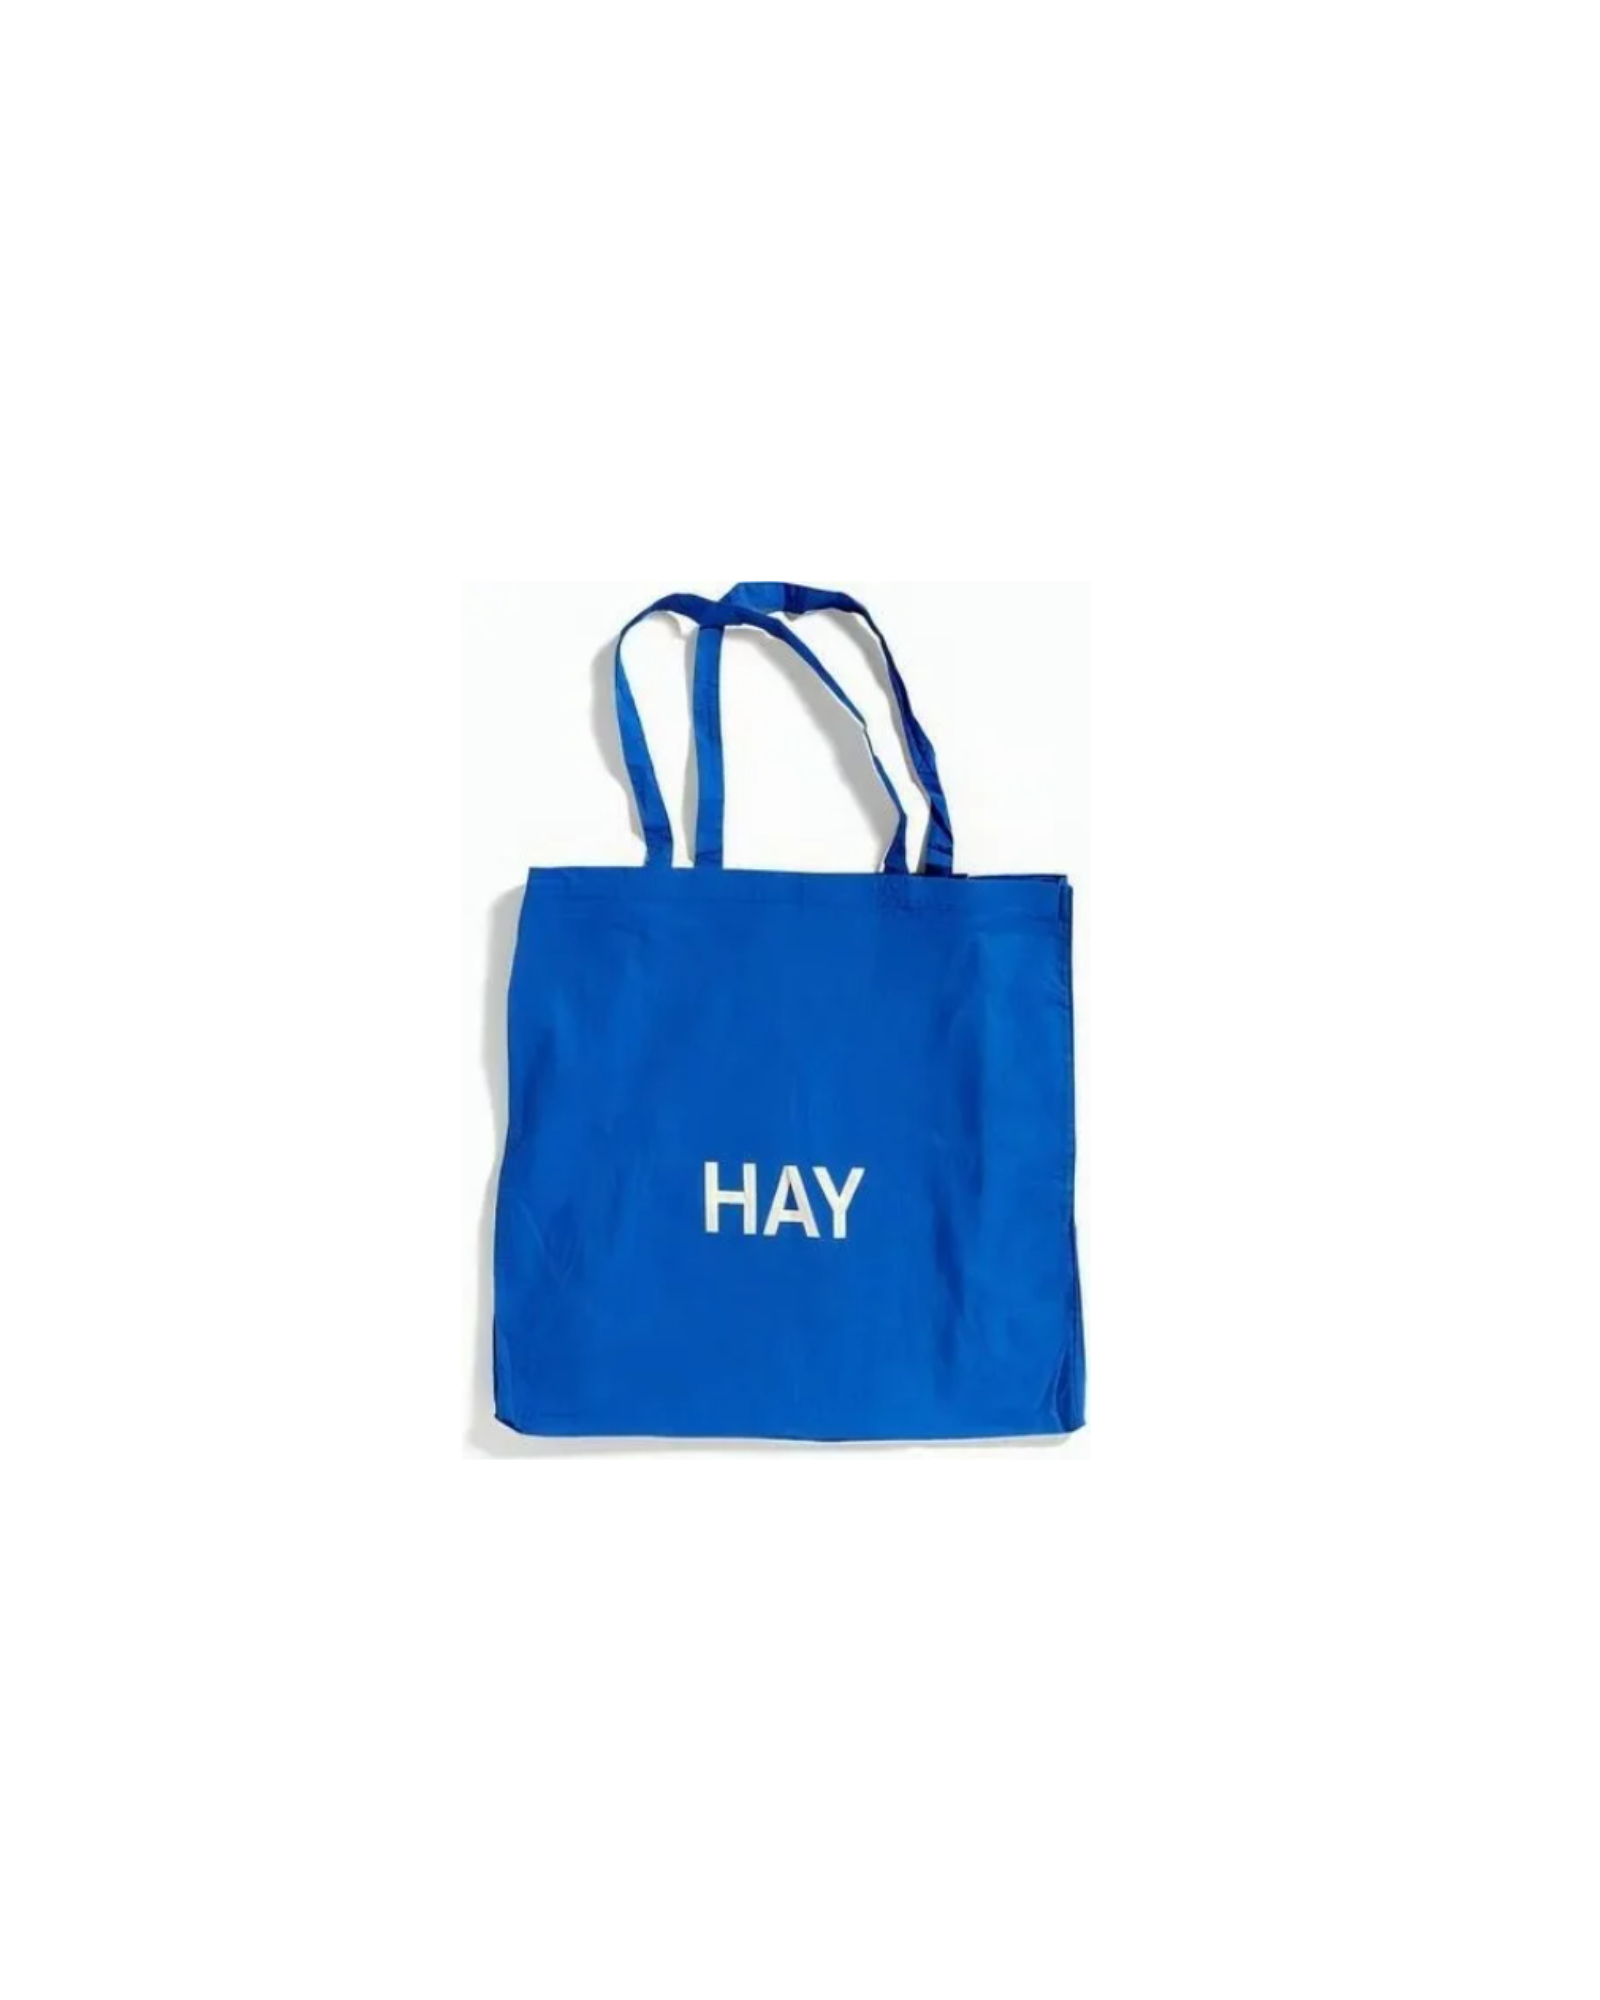  TOTE BAG - BLUE WITH WHITE LOGO 